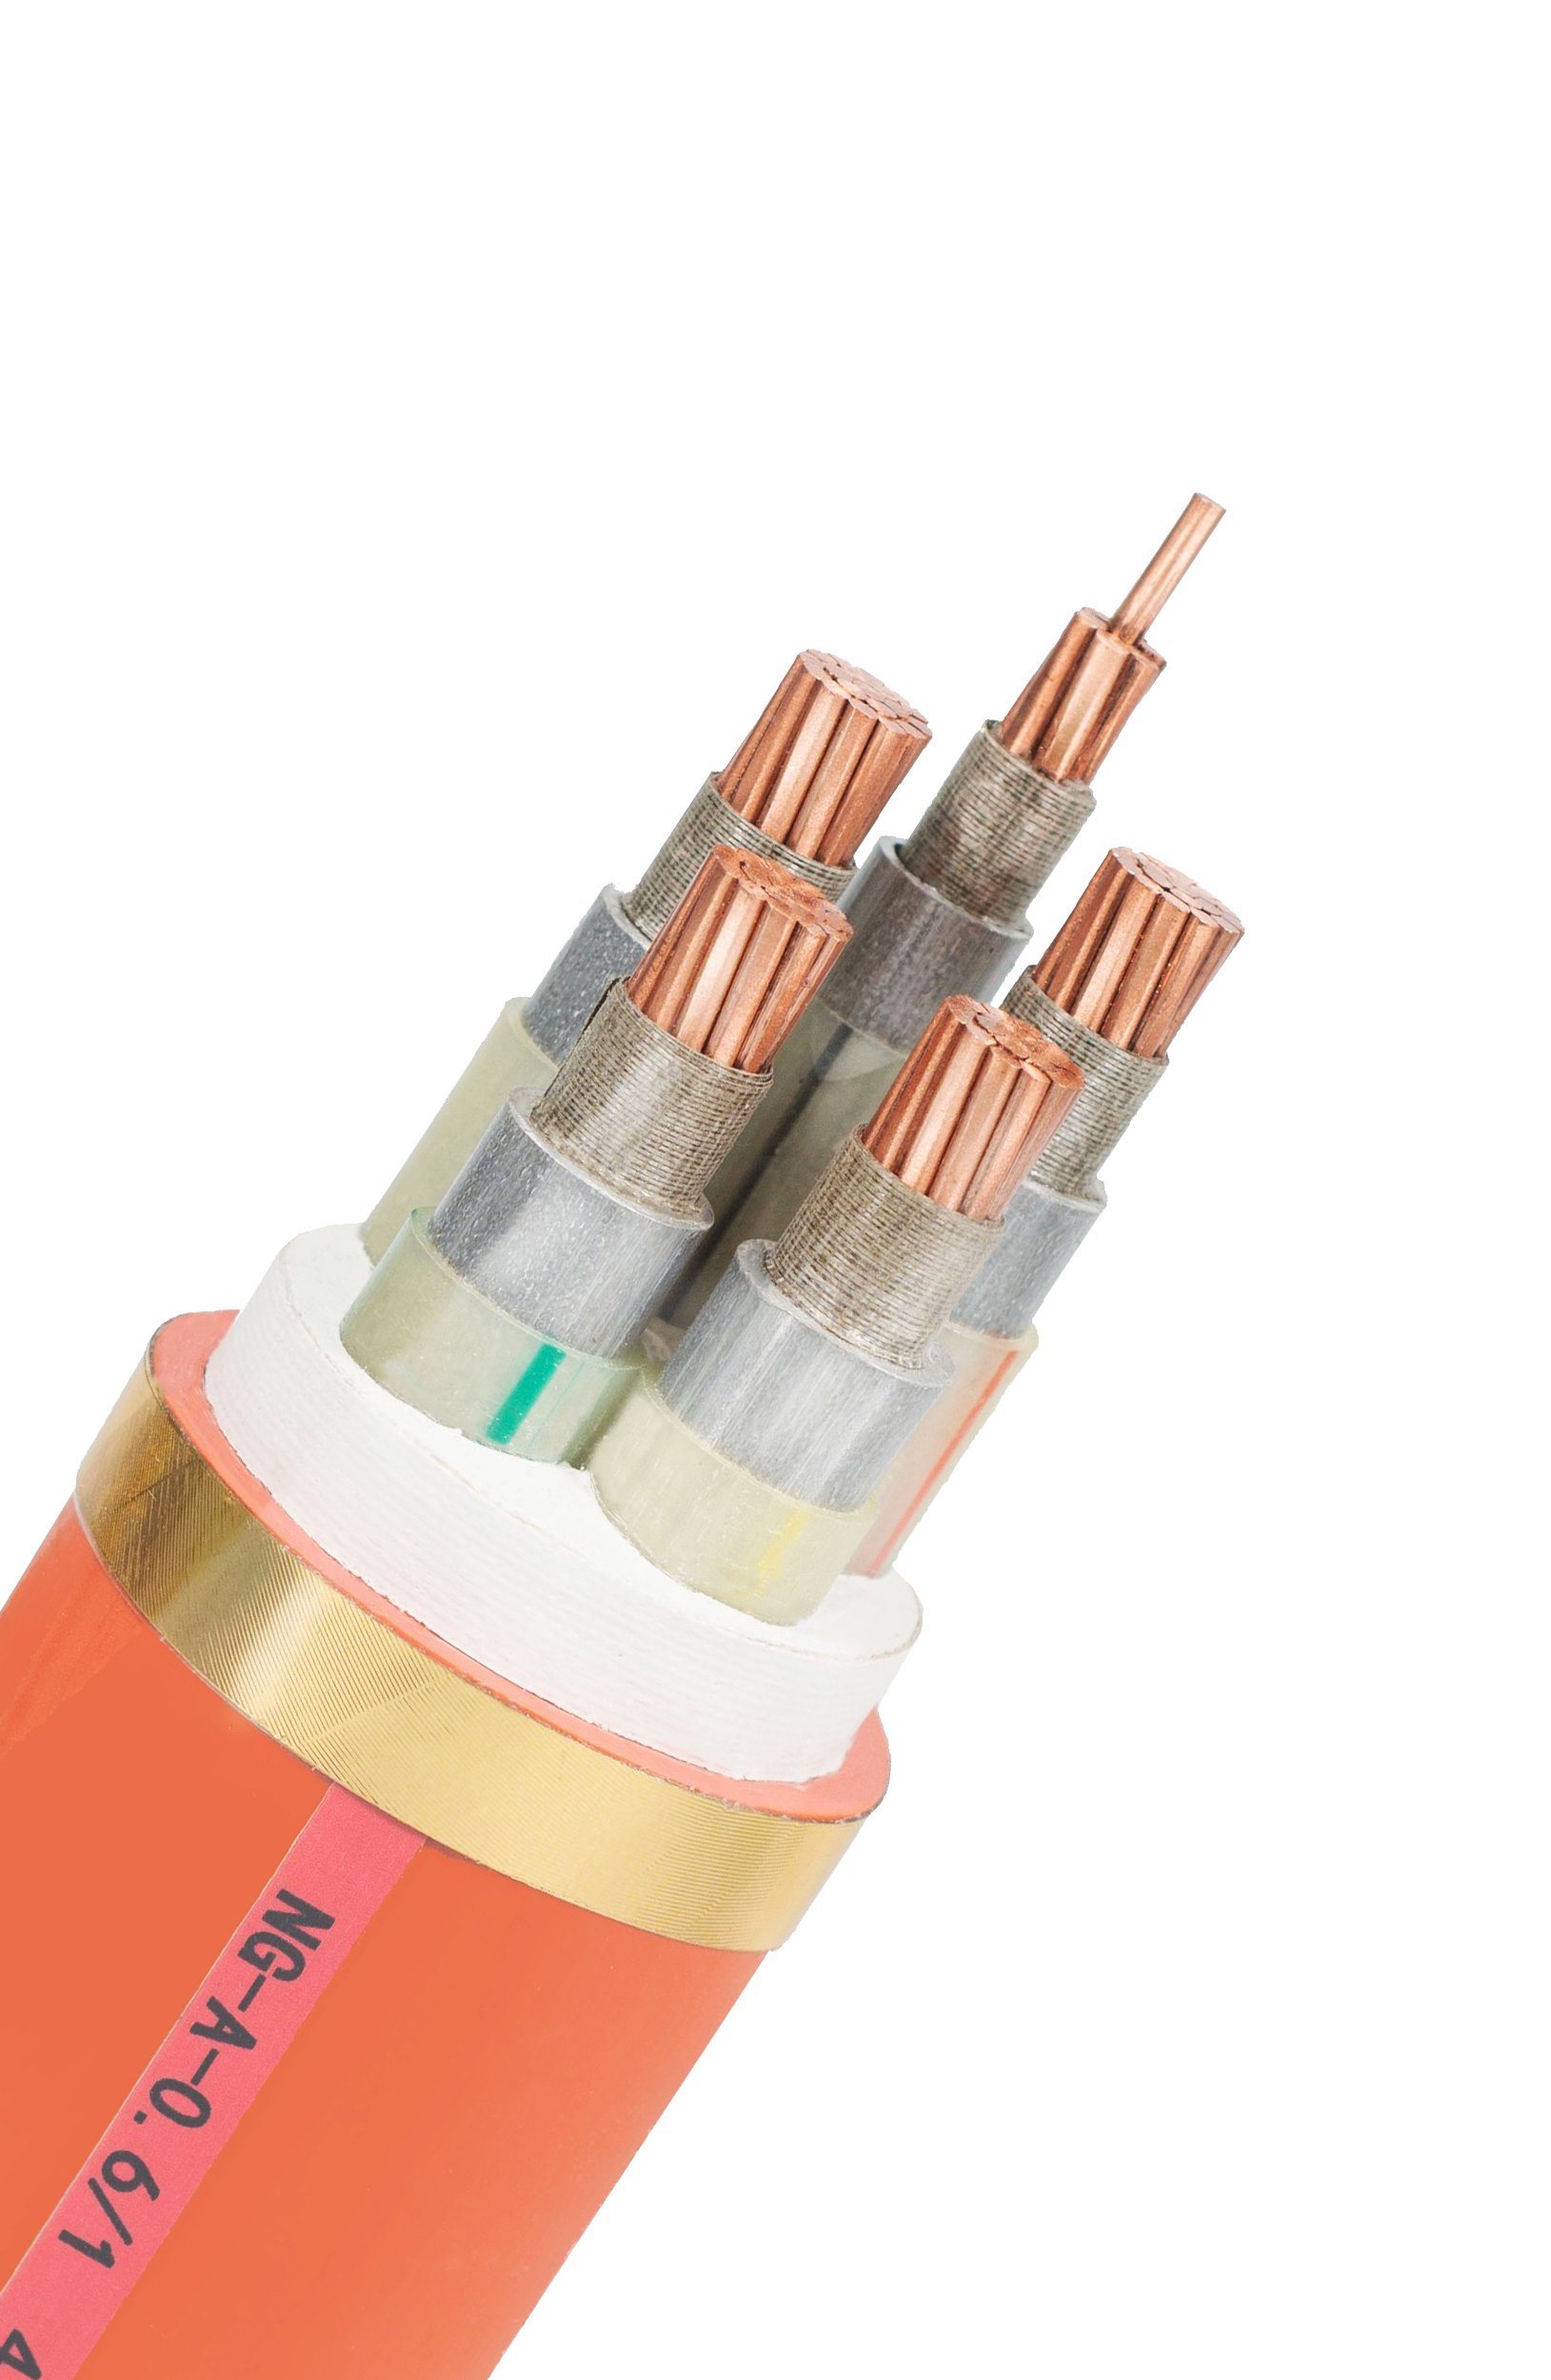 Medium Voltage Copper or Aluminium PVC XLPE Electrical Electric Power Cable Safe Shielded Cable for Computers Power Transmission Electric Cable